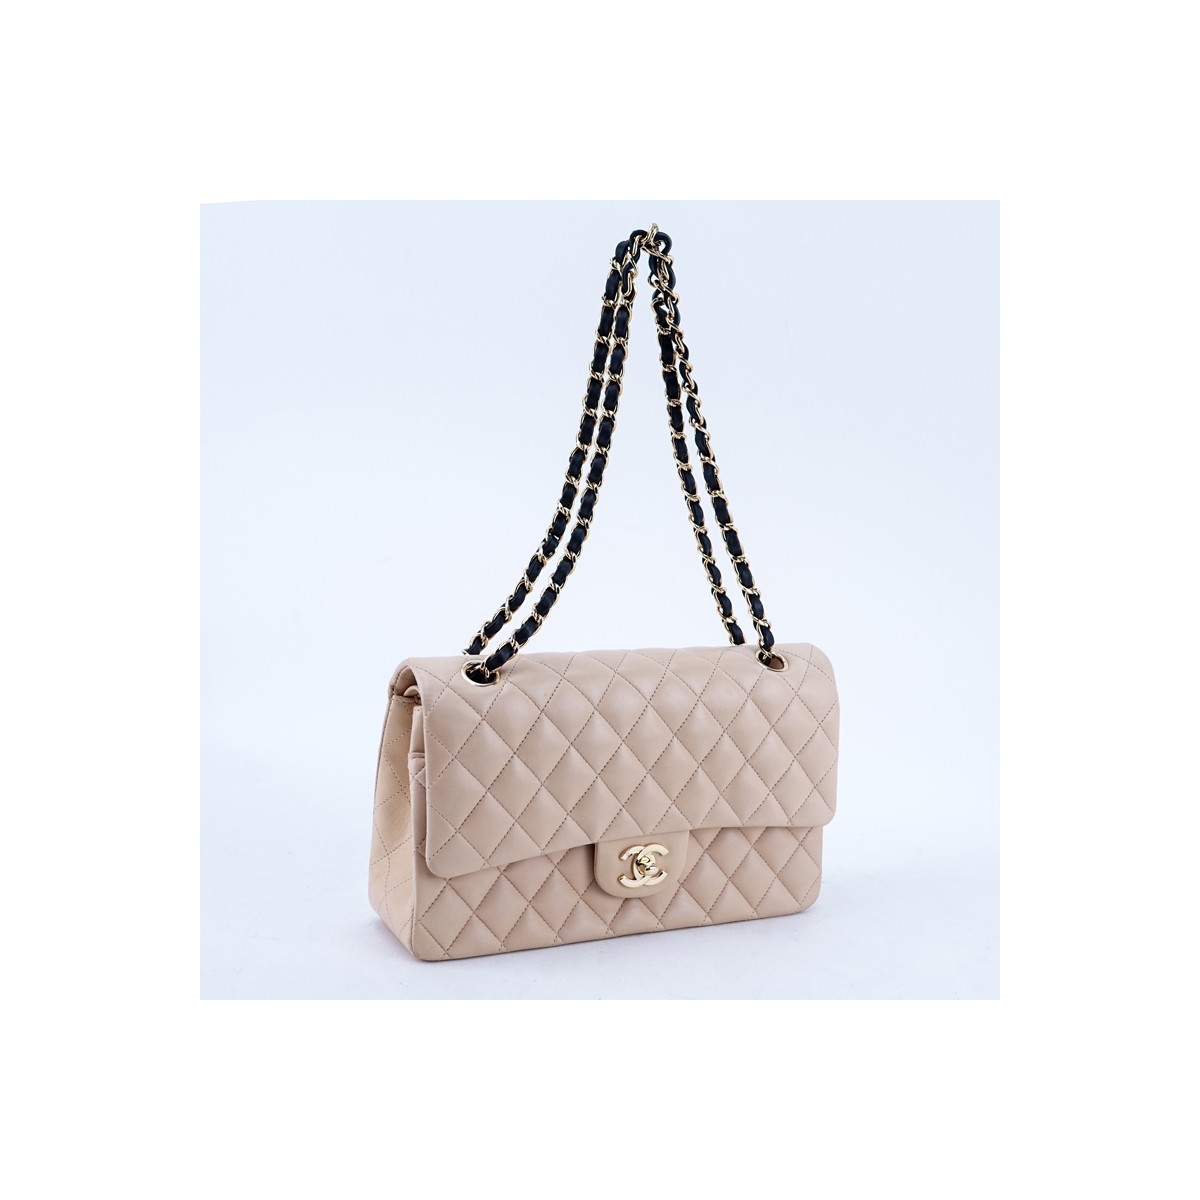 Chanel Light Beige Quilted Leather Bicolor